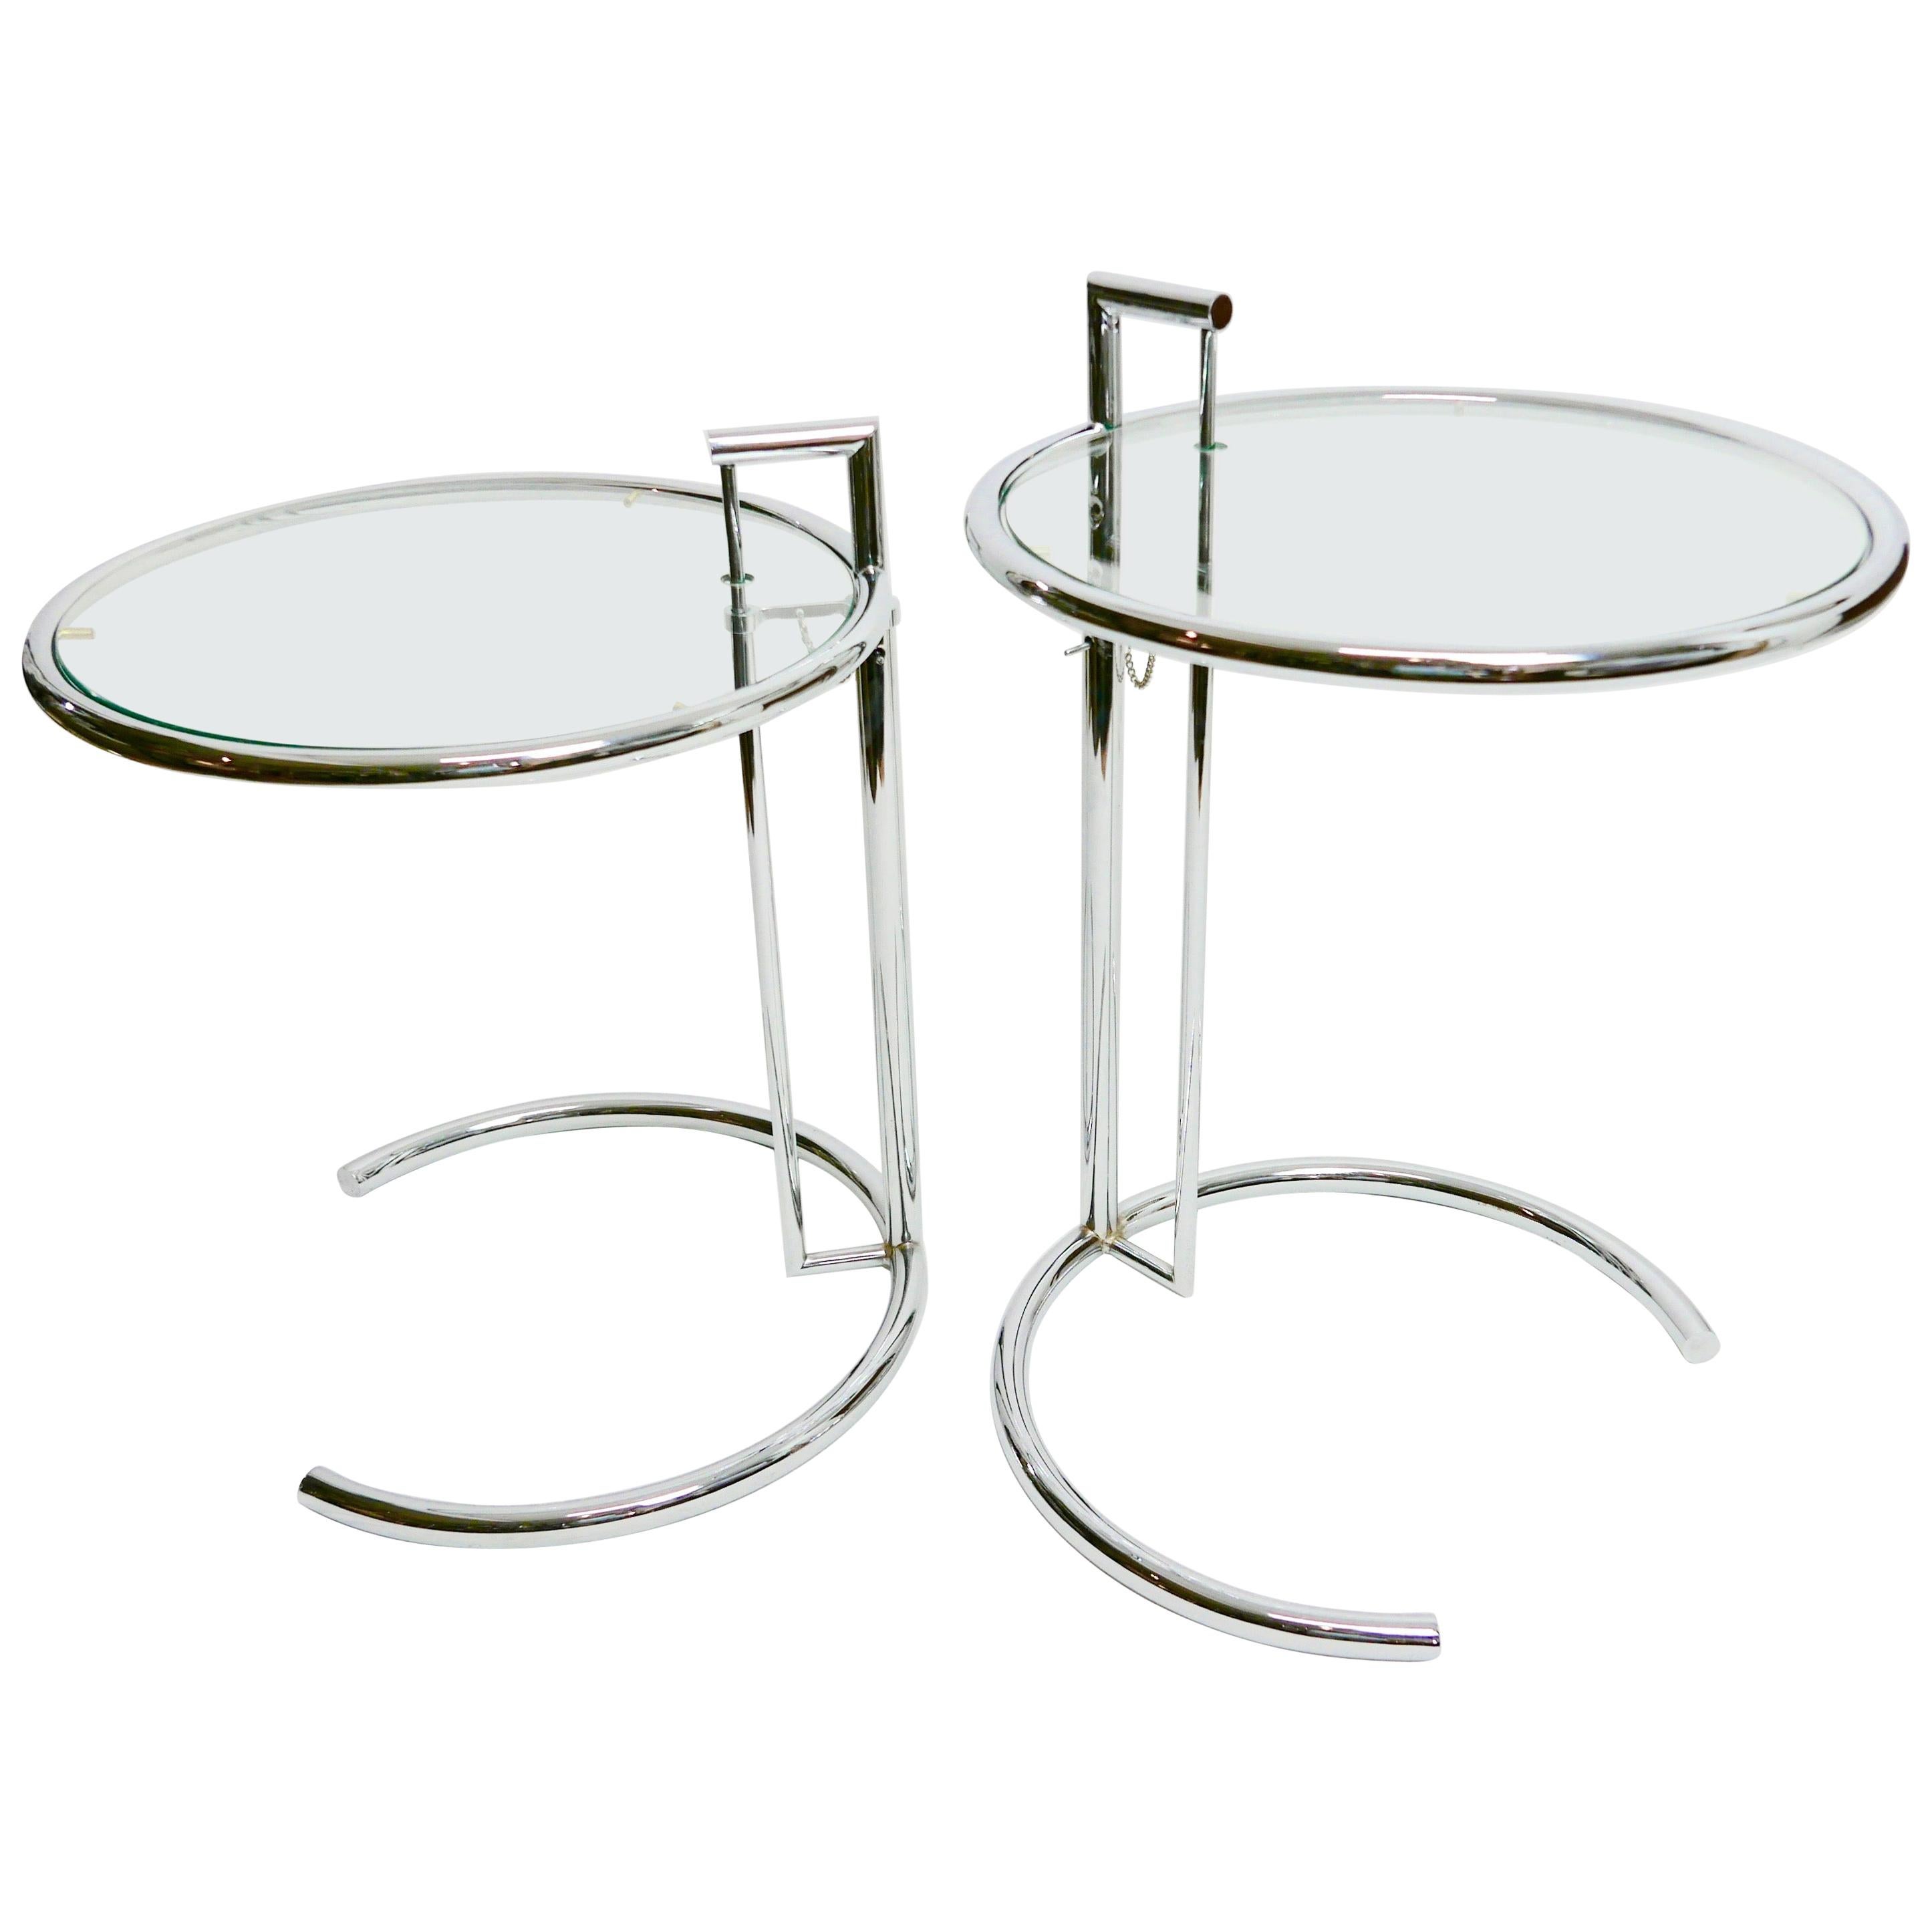 Pair of Eileen Gray Style Adjustable Chrome Metal and Glass Side Tables